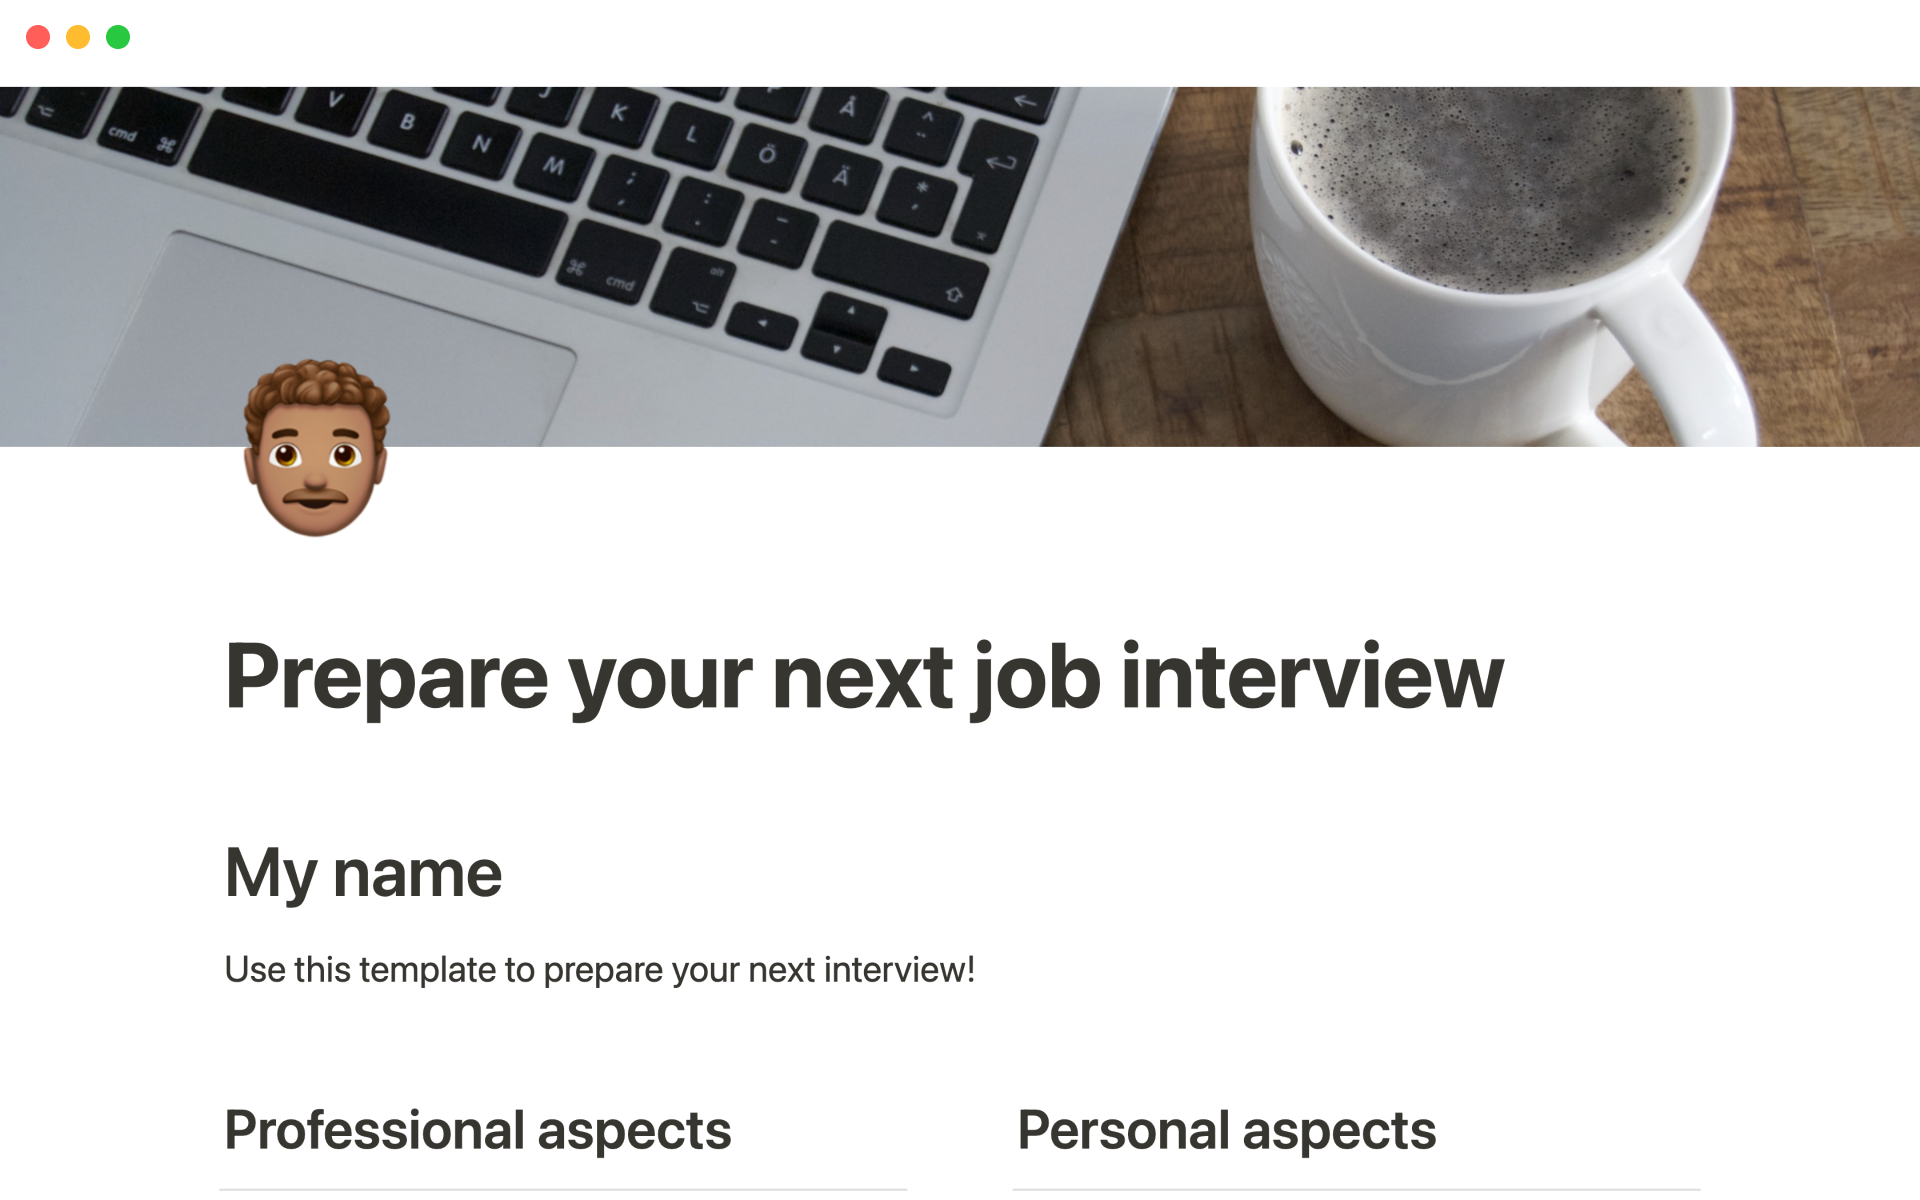 Helps people prepare for their next job interview.